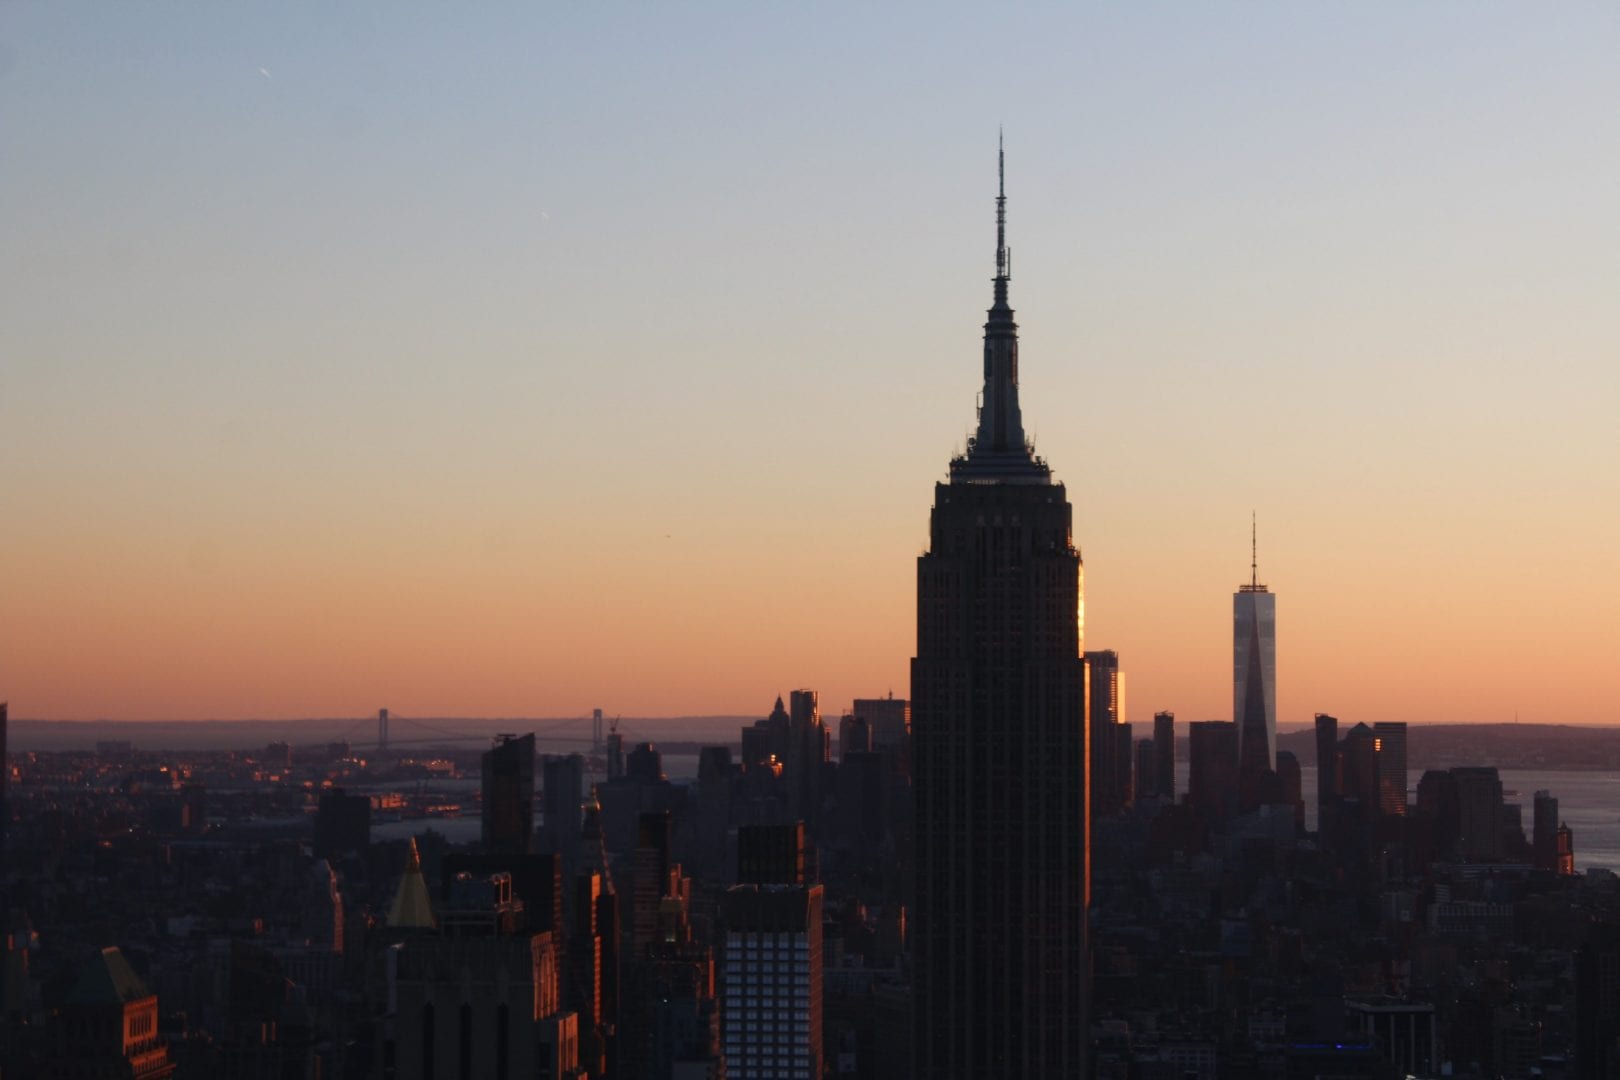 a skyline with a tower prominently shown at sunset